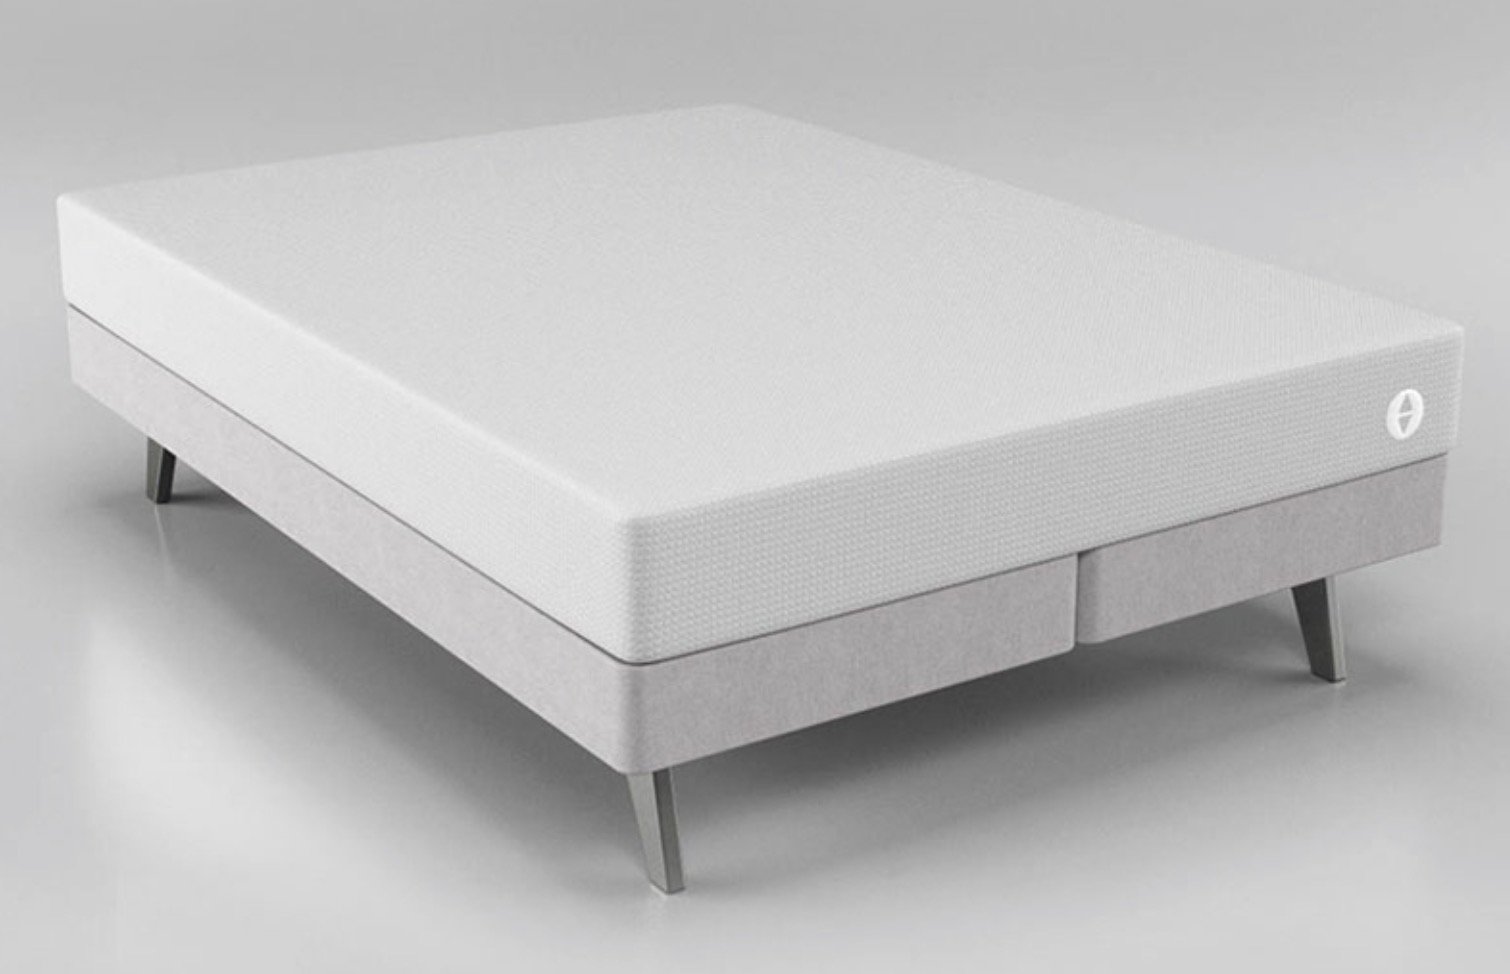 The Sleep Number it Bed tracks your sleep and offers suggestions for better sleep.